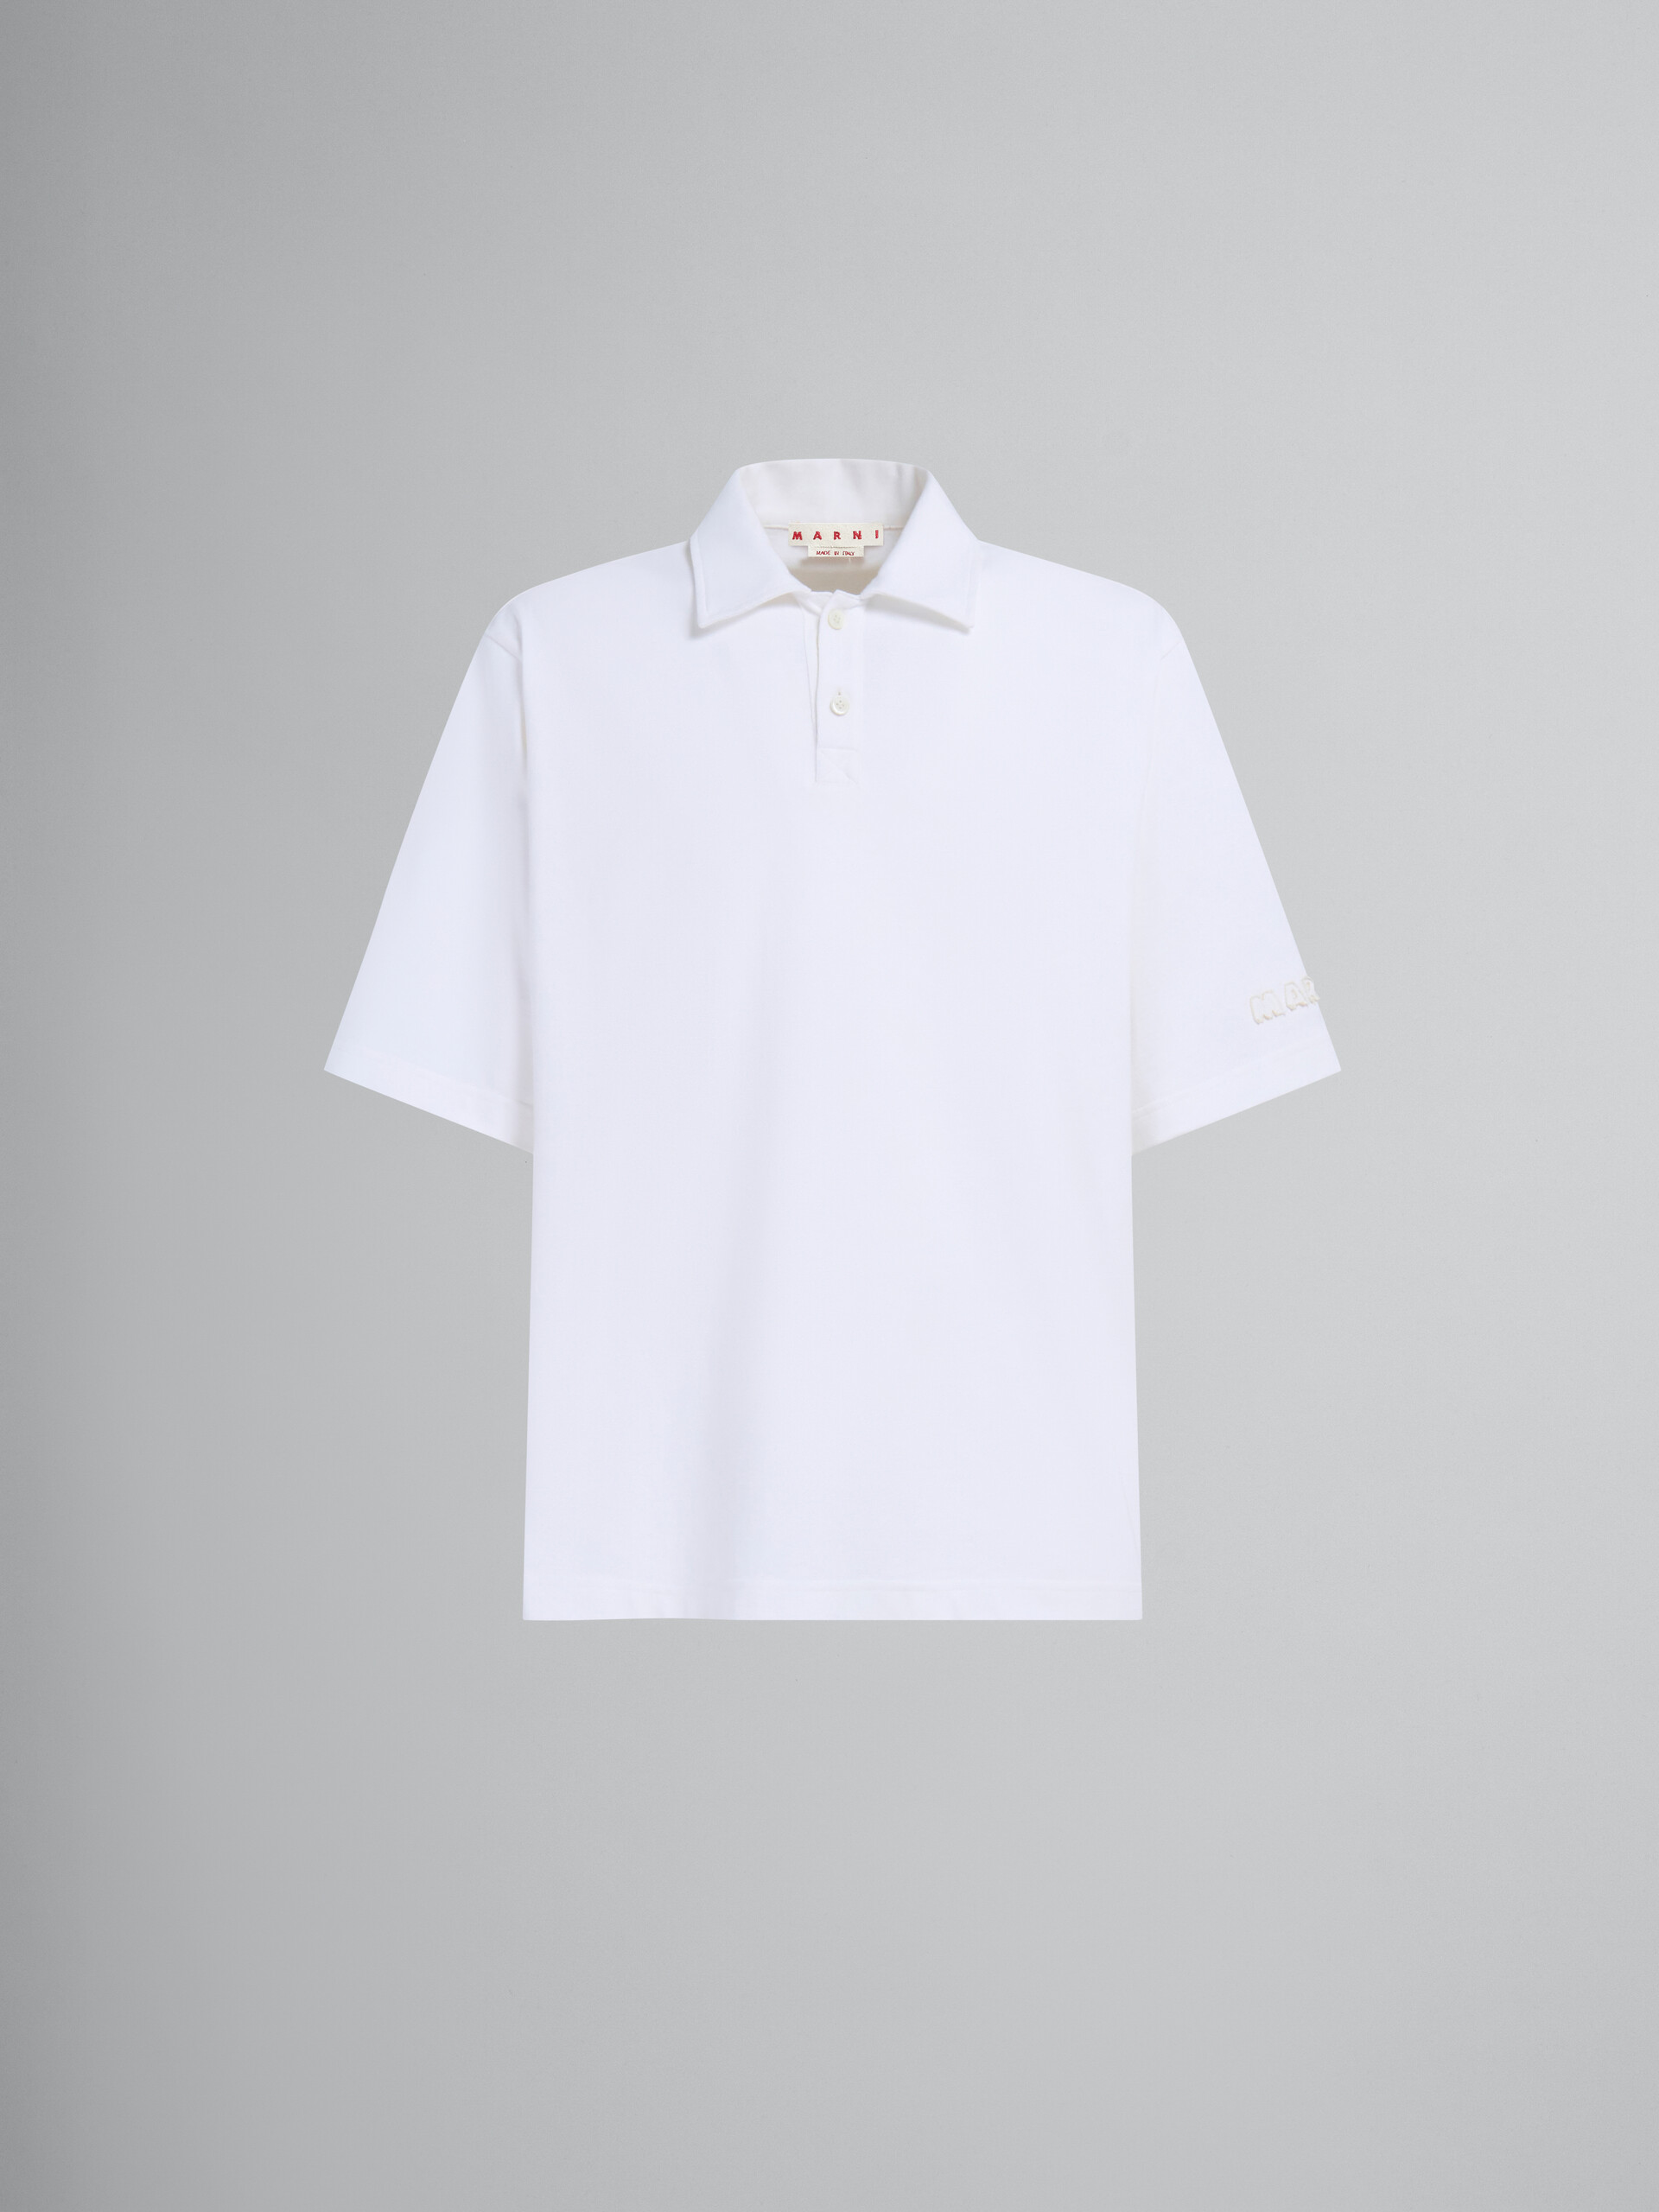 Blue organic cotton oversized polo shirt with Marni patches - Polos - Image 1